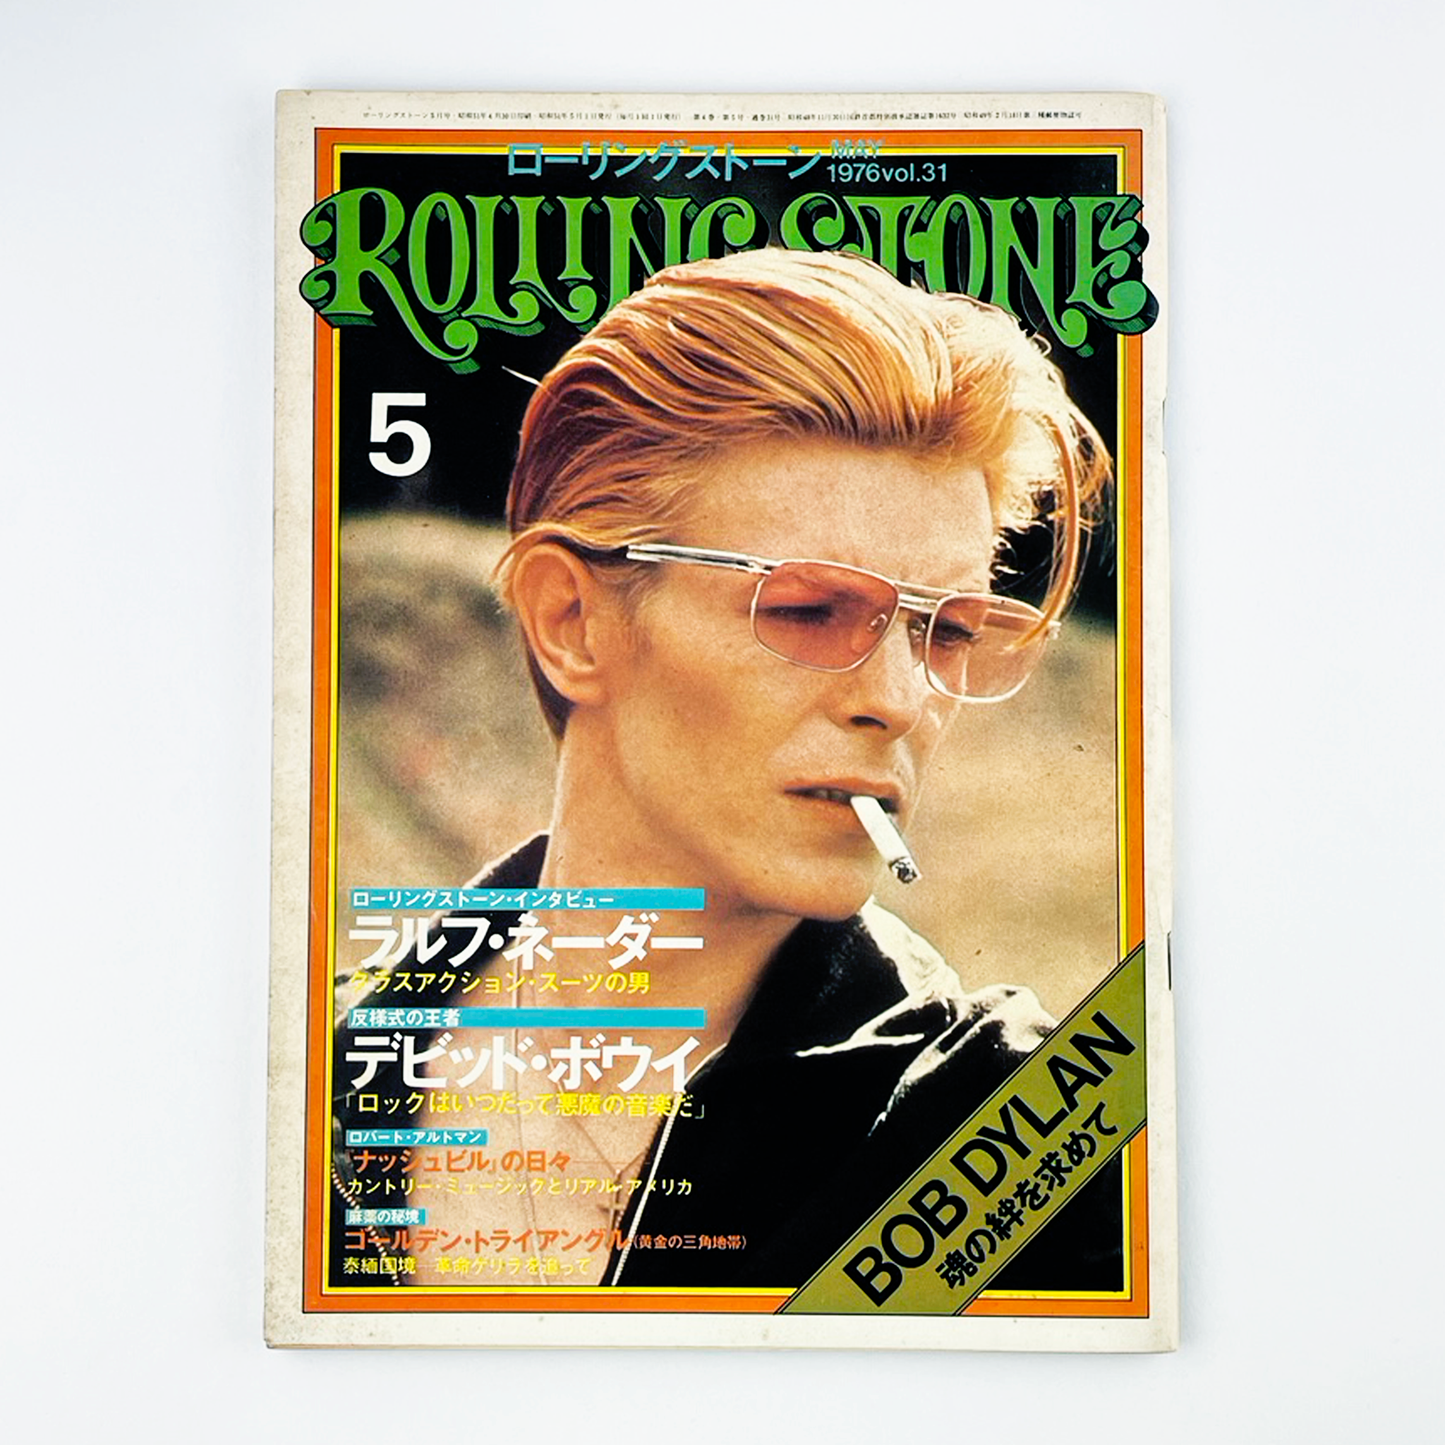 ROLLING STONE 1976 MAY 5 昭和51年5月 | ROLLING STONE編集部